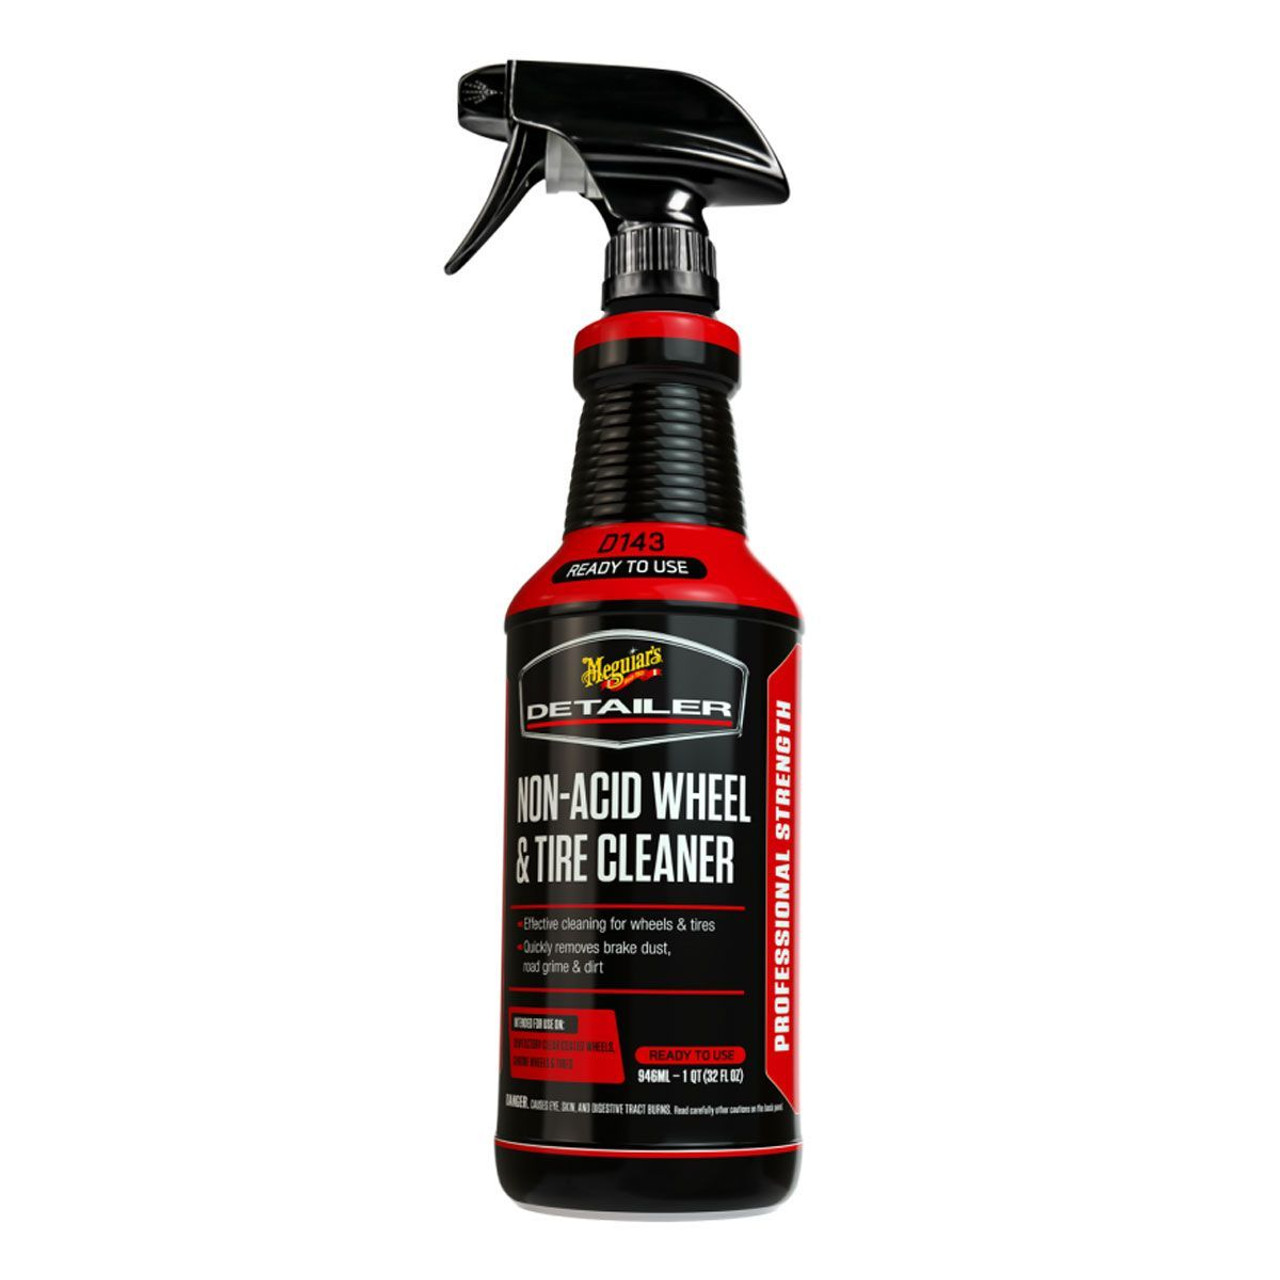  Rev Auto Wheel and Tire Cleaner (1 Gal) - Professional Car  Wheel Cleaner That Removes Brake Dust and Tire Browning